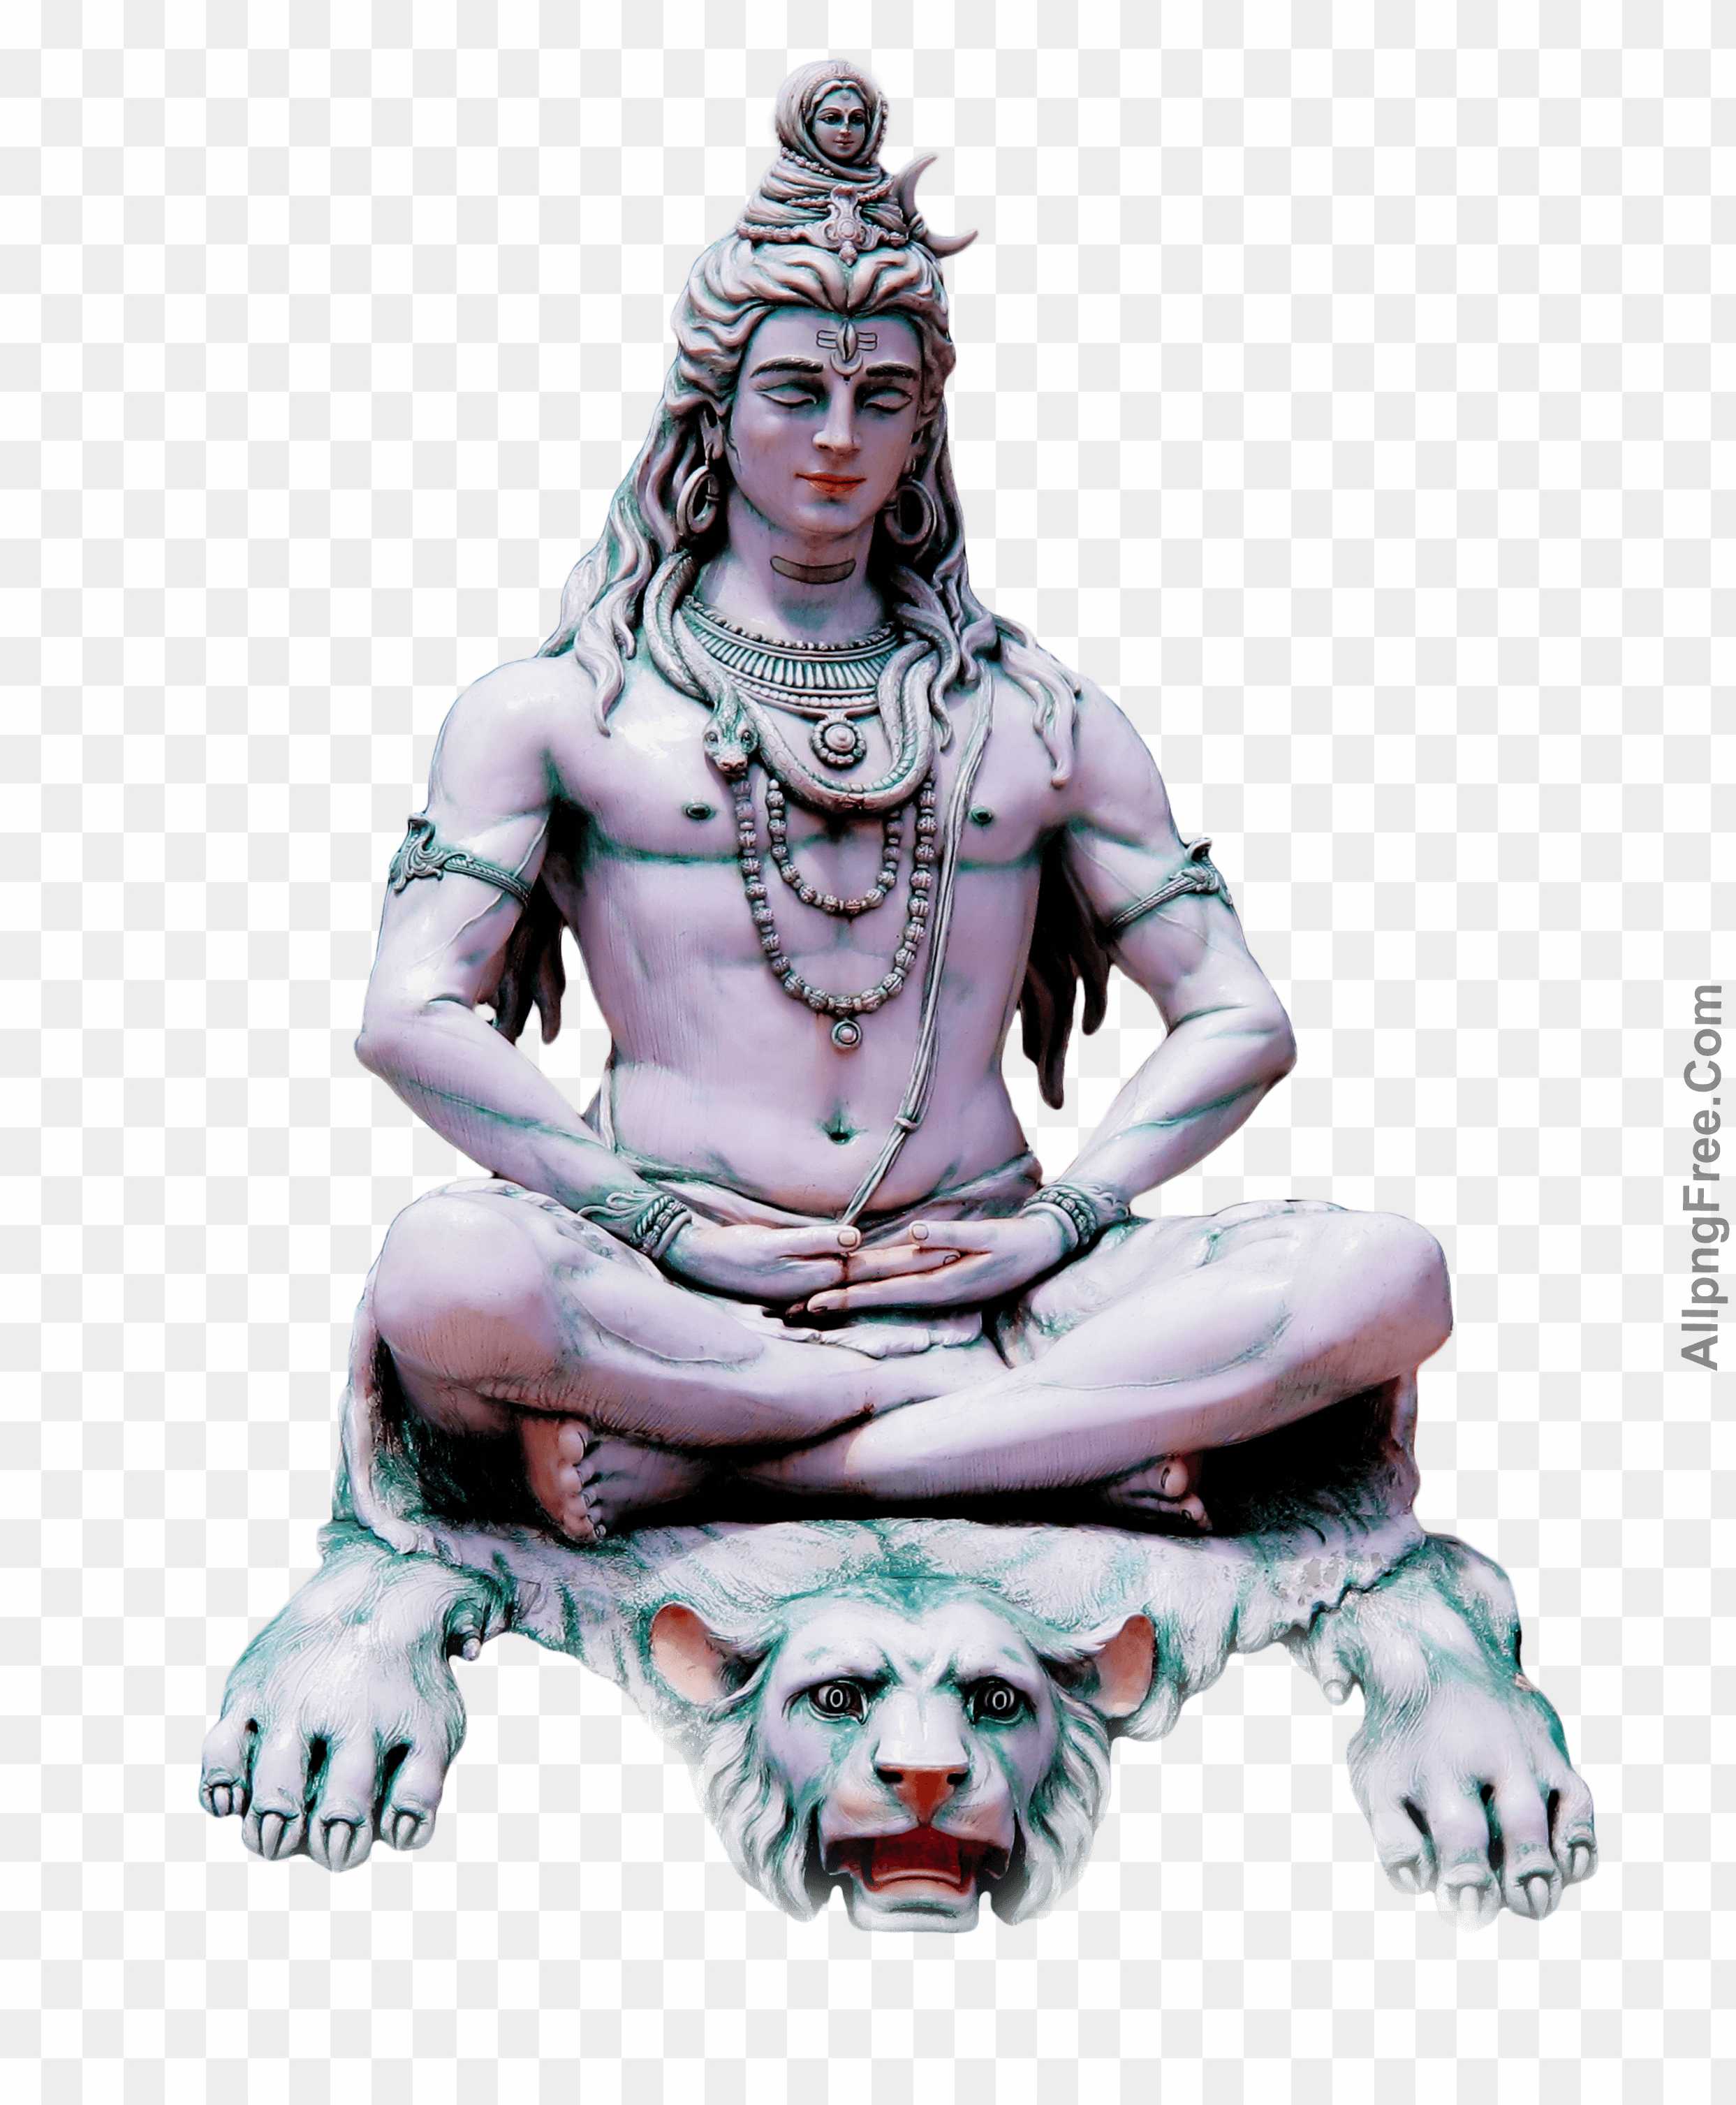 Latest [1200+] Lord Shiva Images, HD Wallpapers, Photos, Pictures,  Paintings, illustrations | SocialStatusDP.com